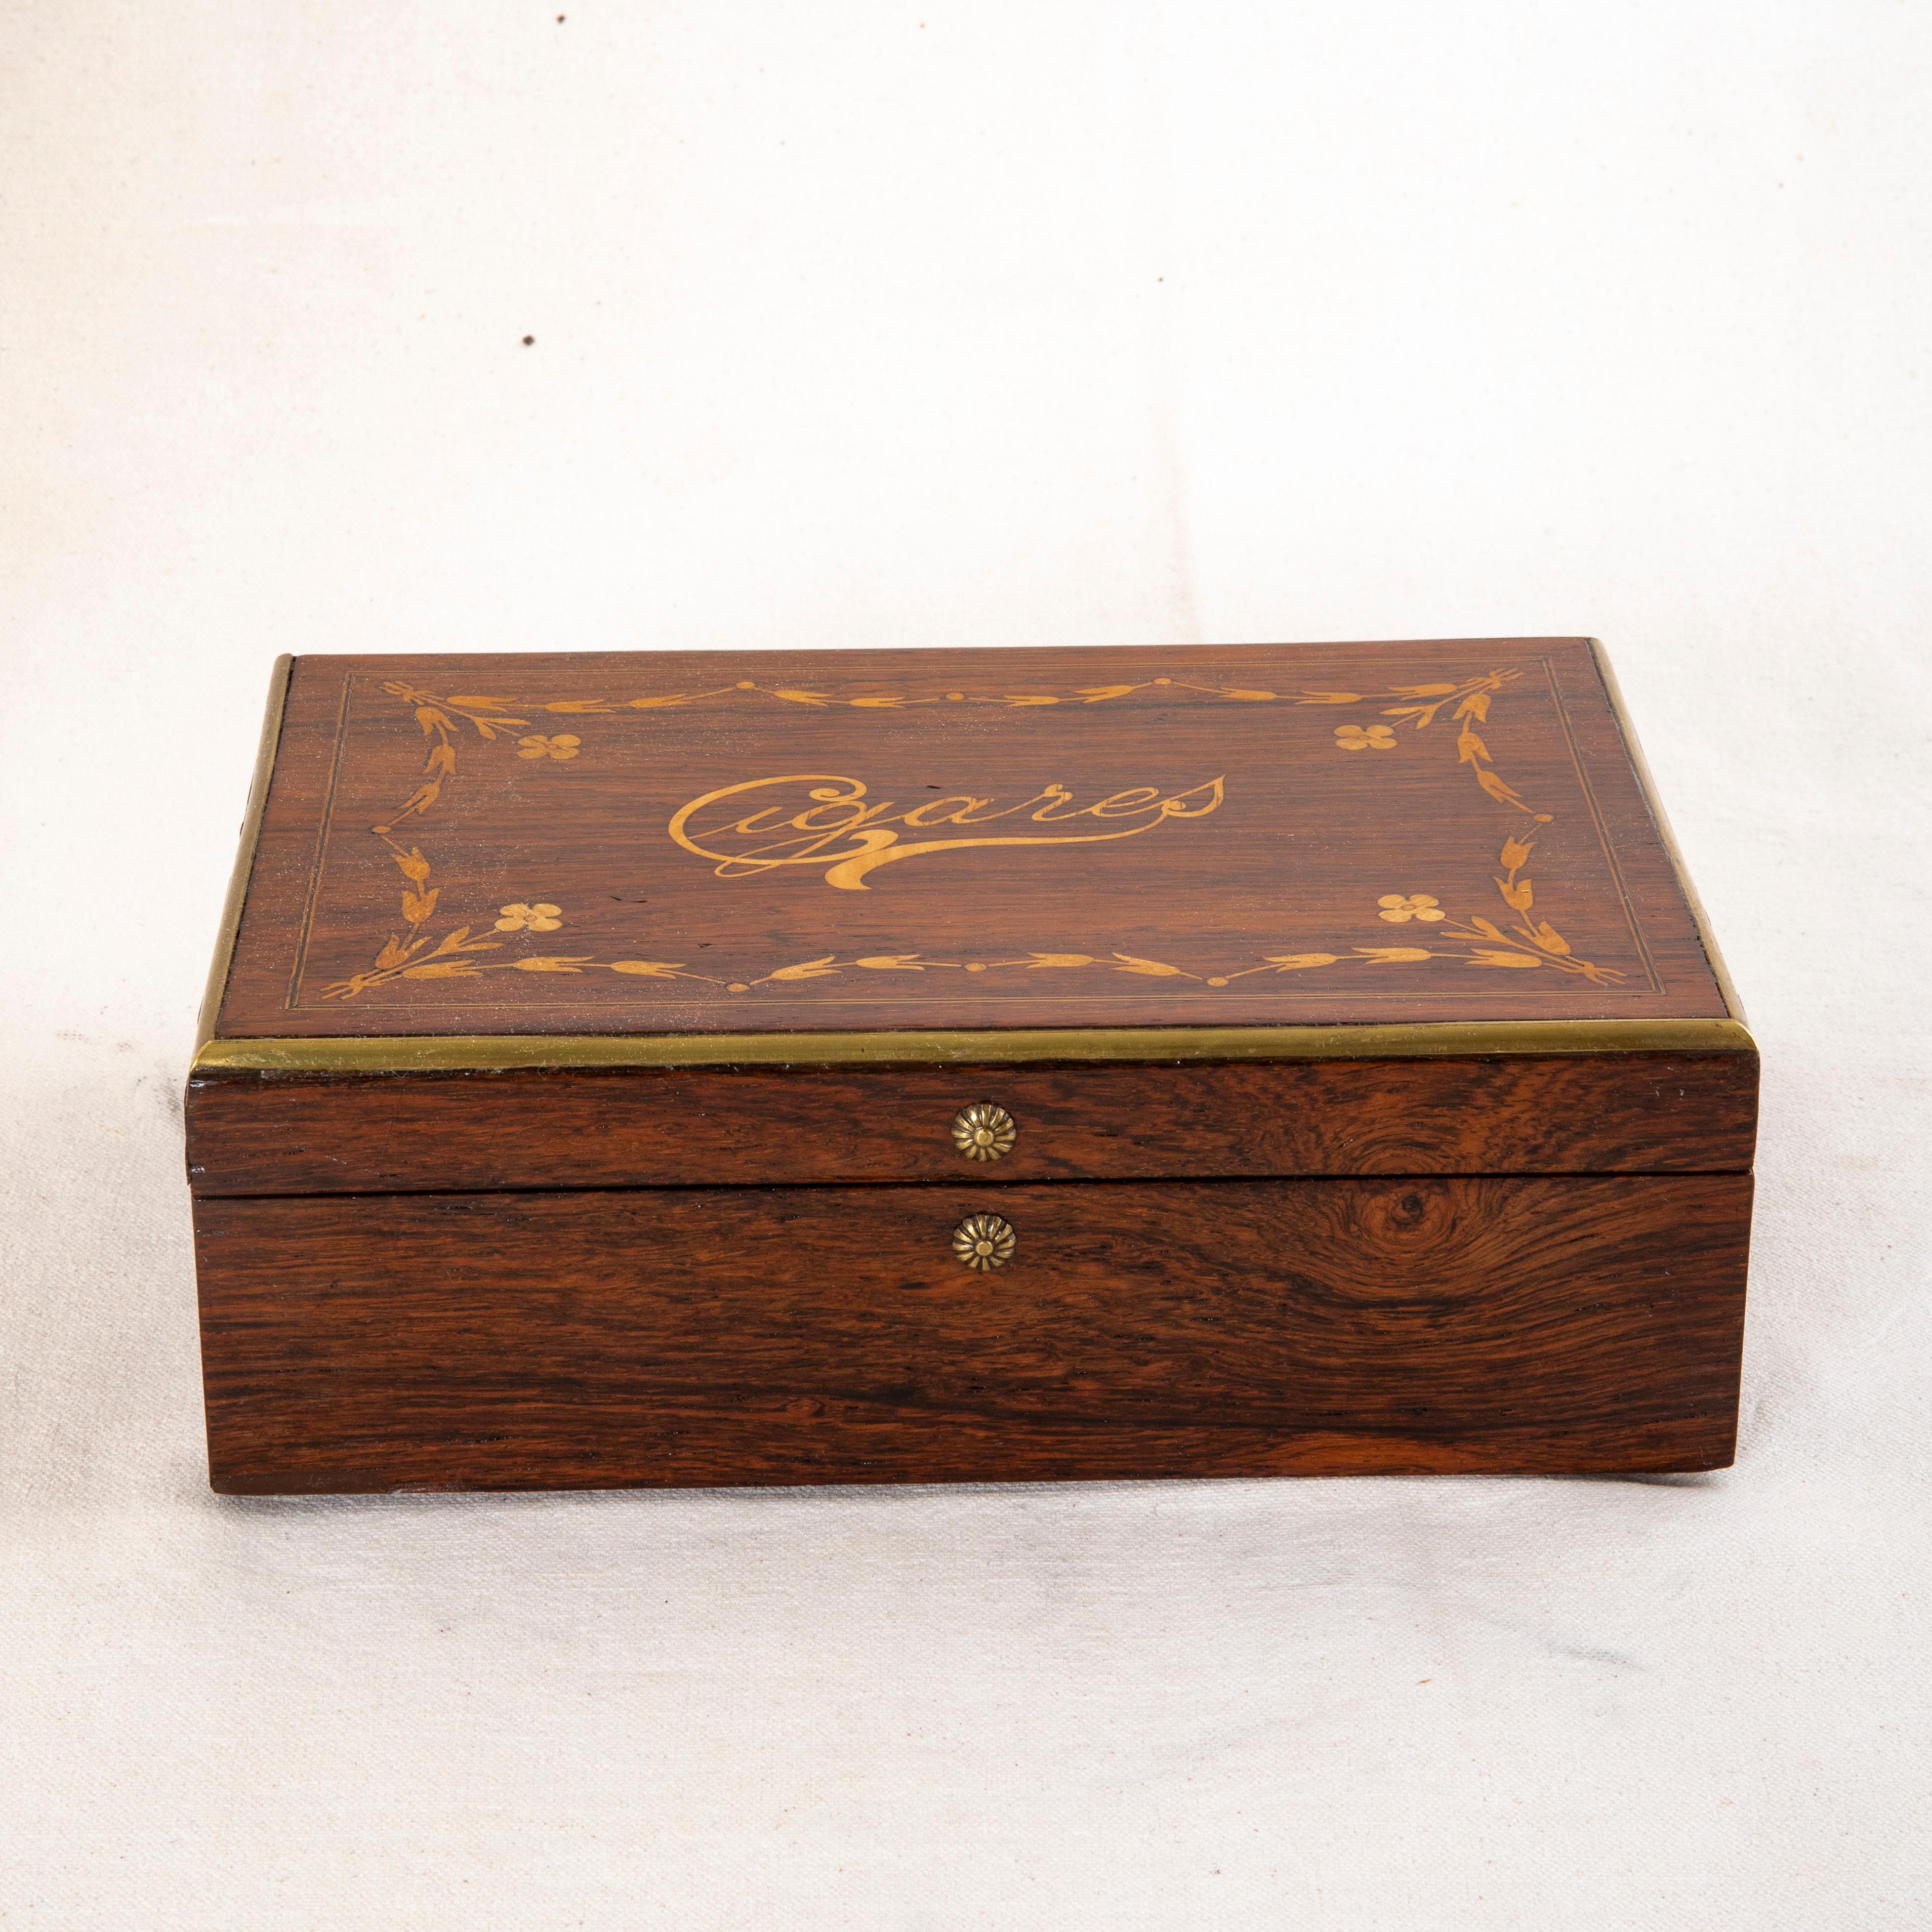 This mid nineteenth century French Napoleon III period marquetry cigar presentation box is constructed of rosewood and is marked Cigares on the top in lemon wood inlay.  Additional inlay of garlands and flowers surround the central designation of